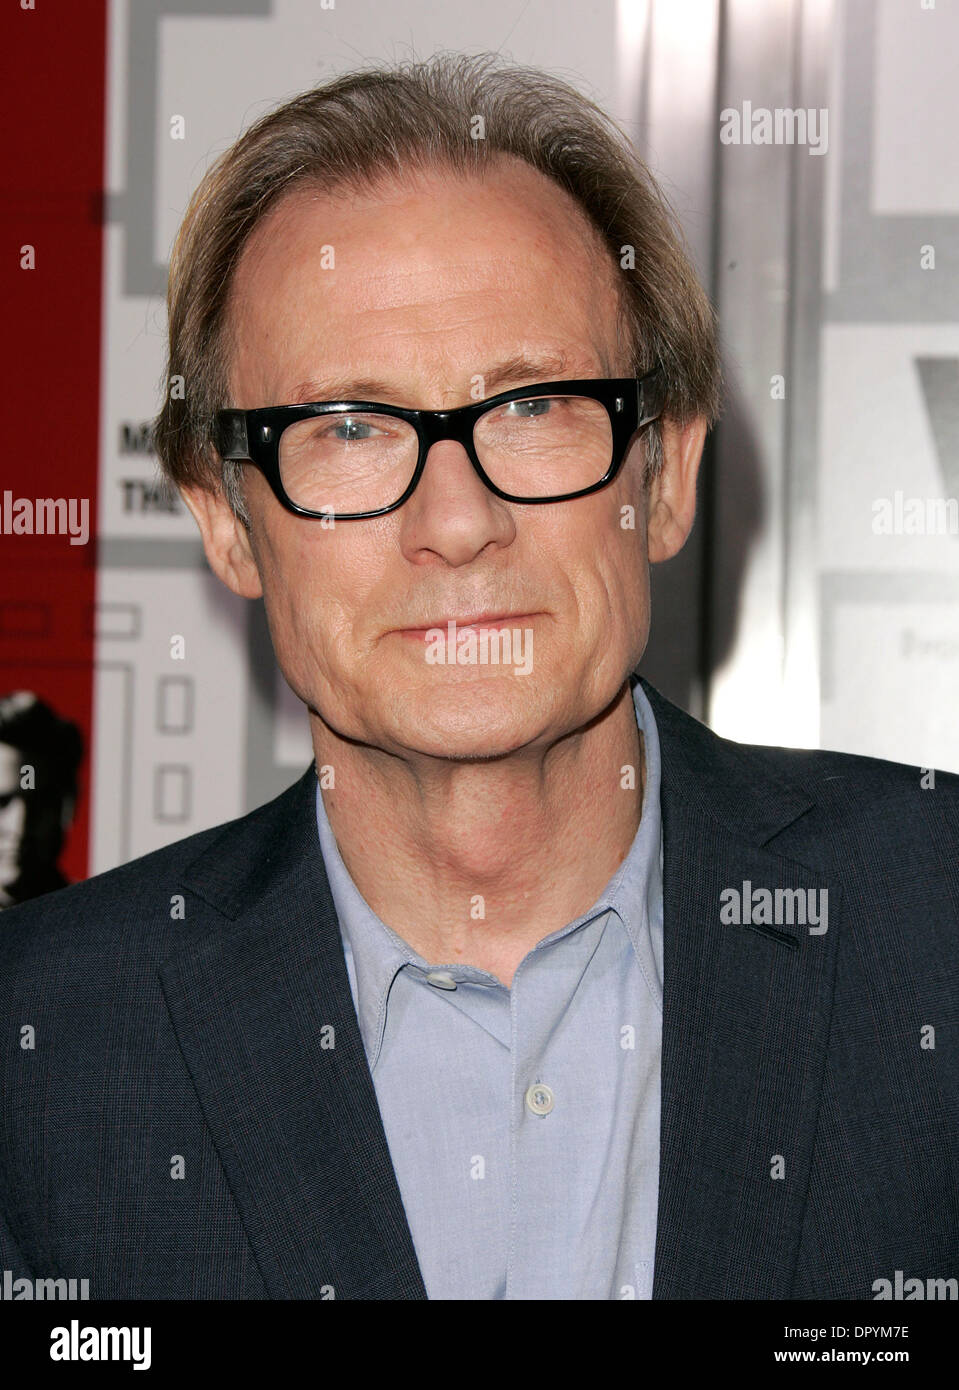 Dec 18, 2008 - Los Angeles, California, USA - Actor BILL NIGHY arriving to 'Valkyrie' Los Angeles Premiere held at the Director's Guild of America. (Credit Image: © Lisa O'Connor/ZUMA Press) Stock Photo